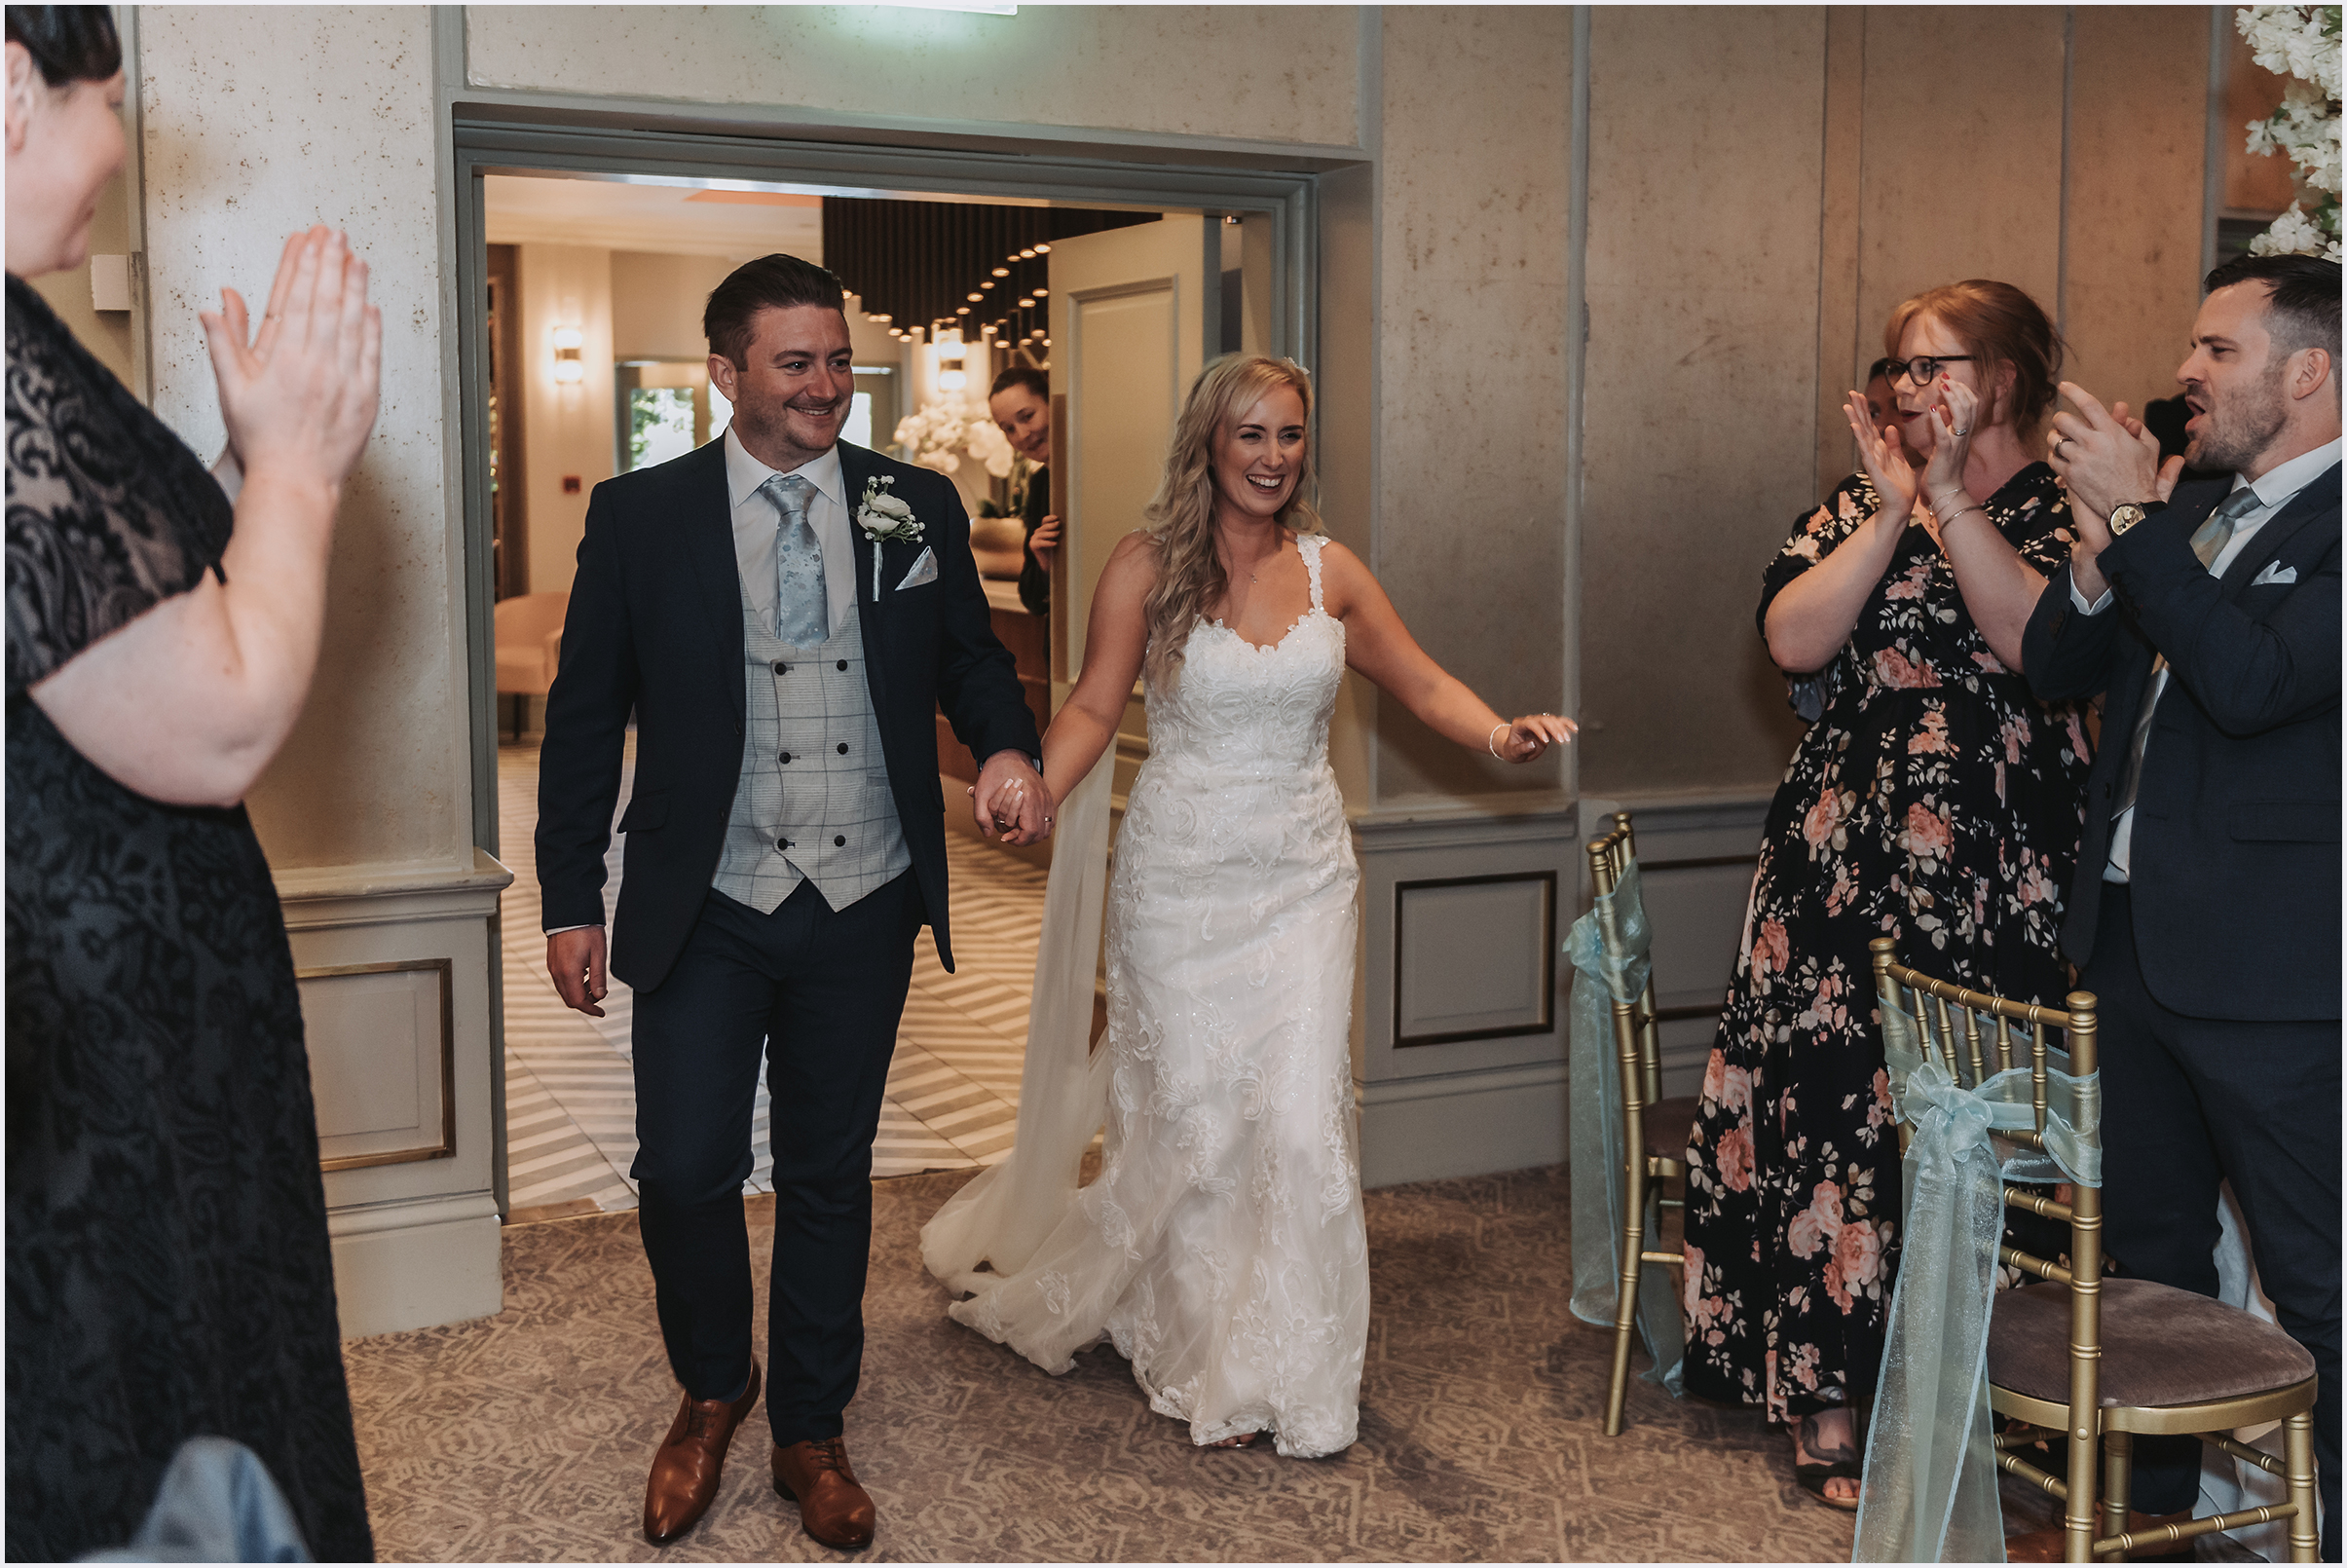 Guests standing and applauding a bride and groom as they enter the room for the wedding breakfast at The Grosvenor Pulford Hotel and Spa.